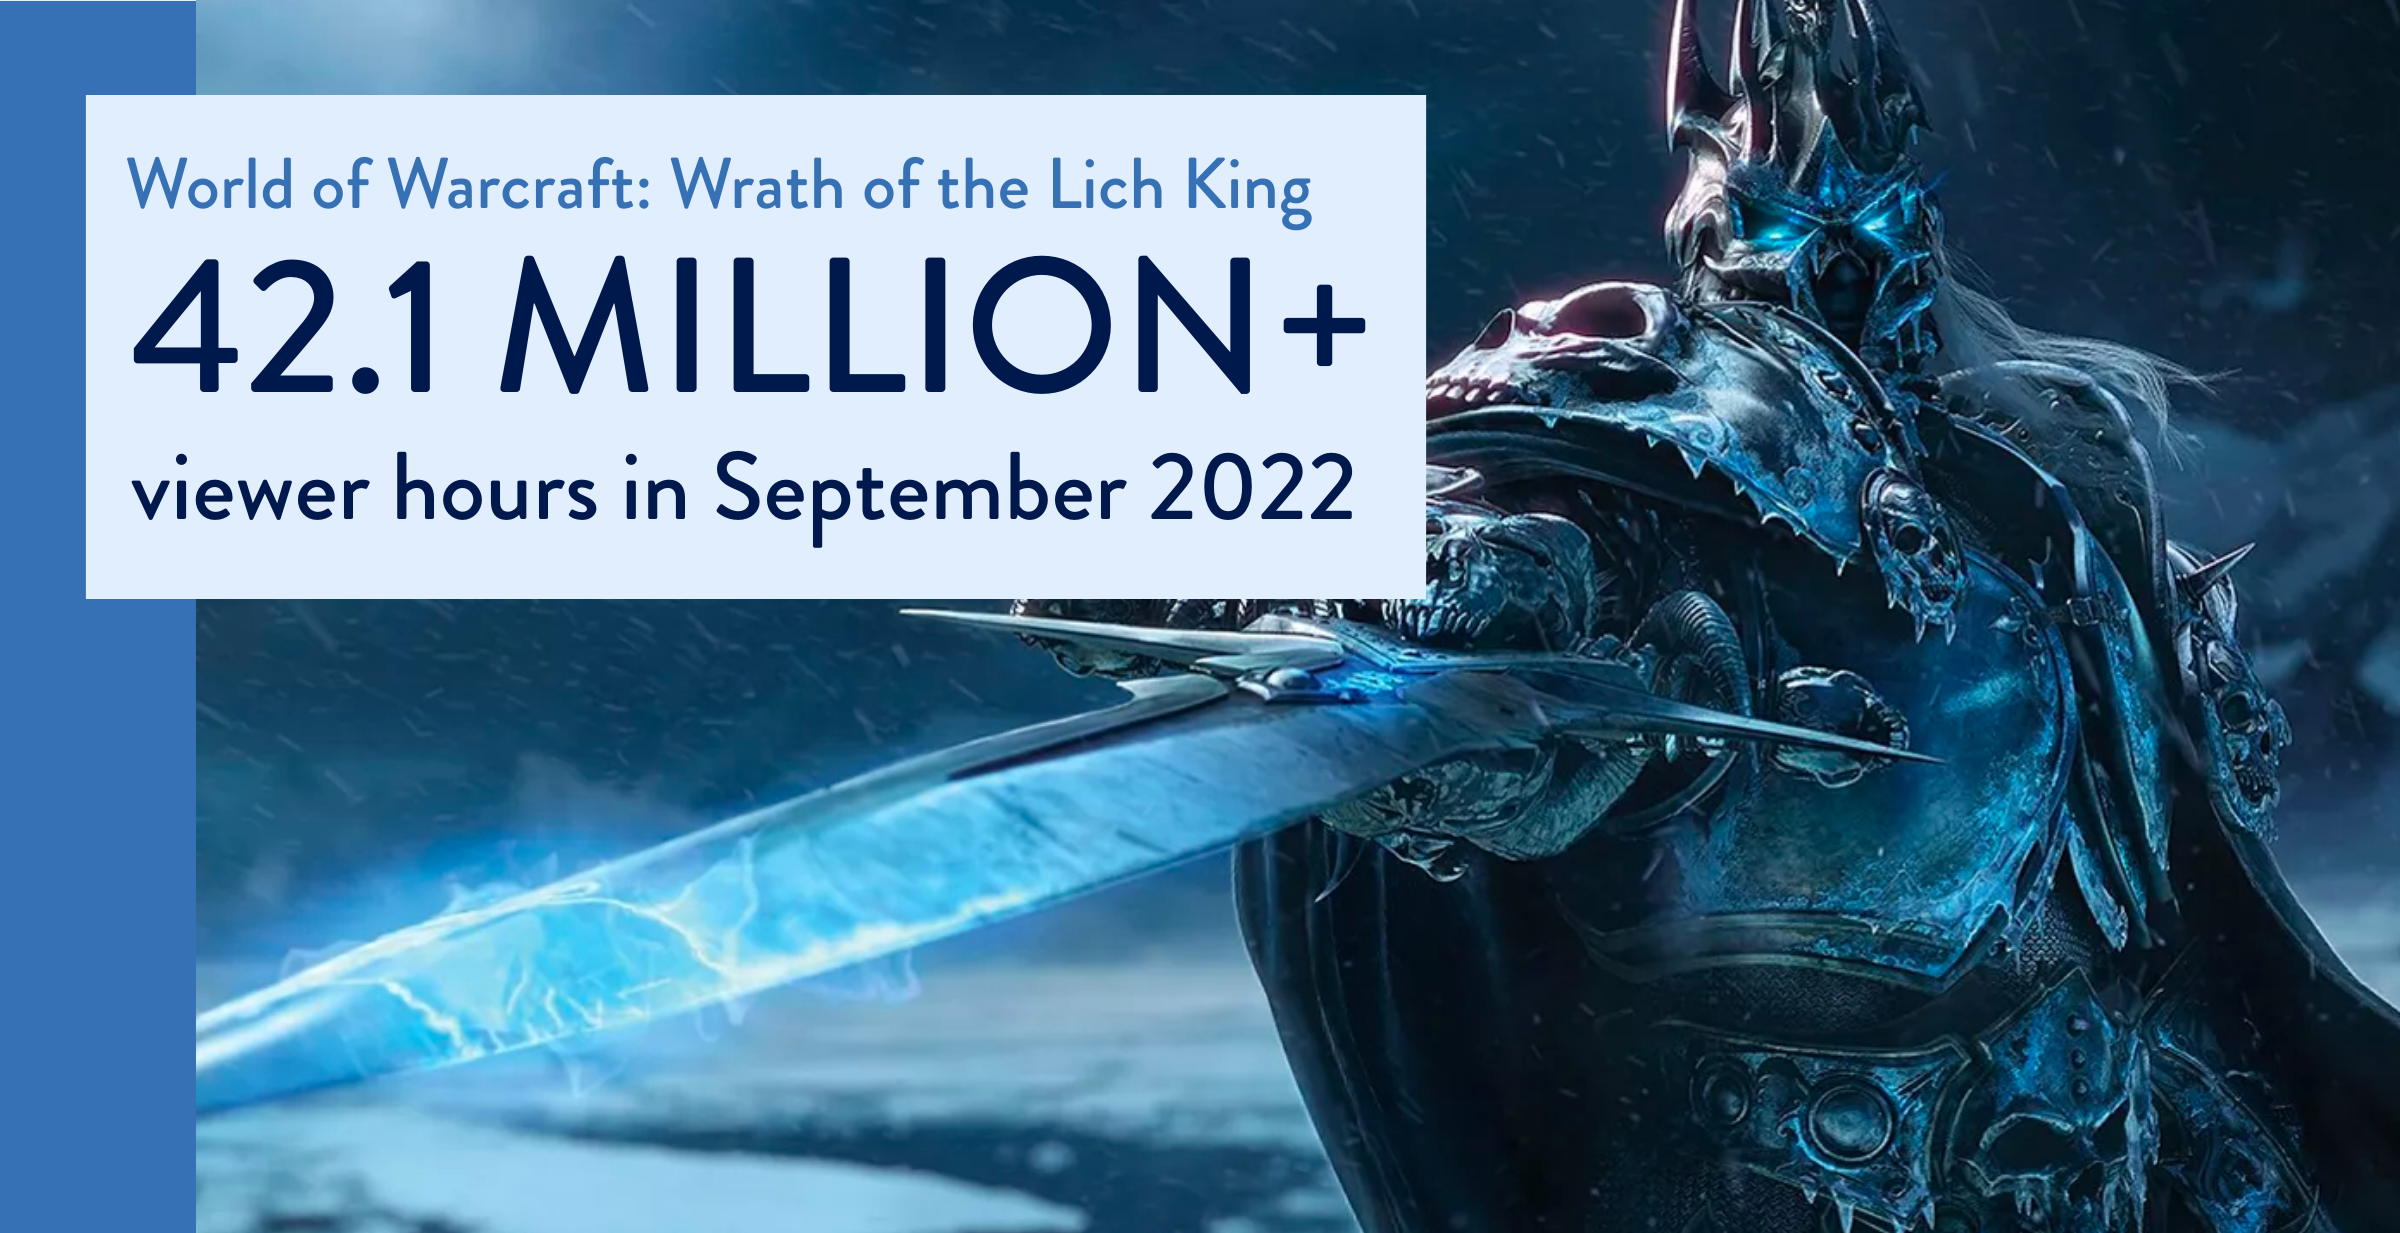 World of Warcraft: Wrath of the Lich King hits 366,000 peak viewership